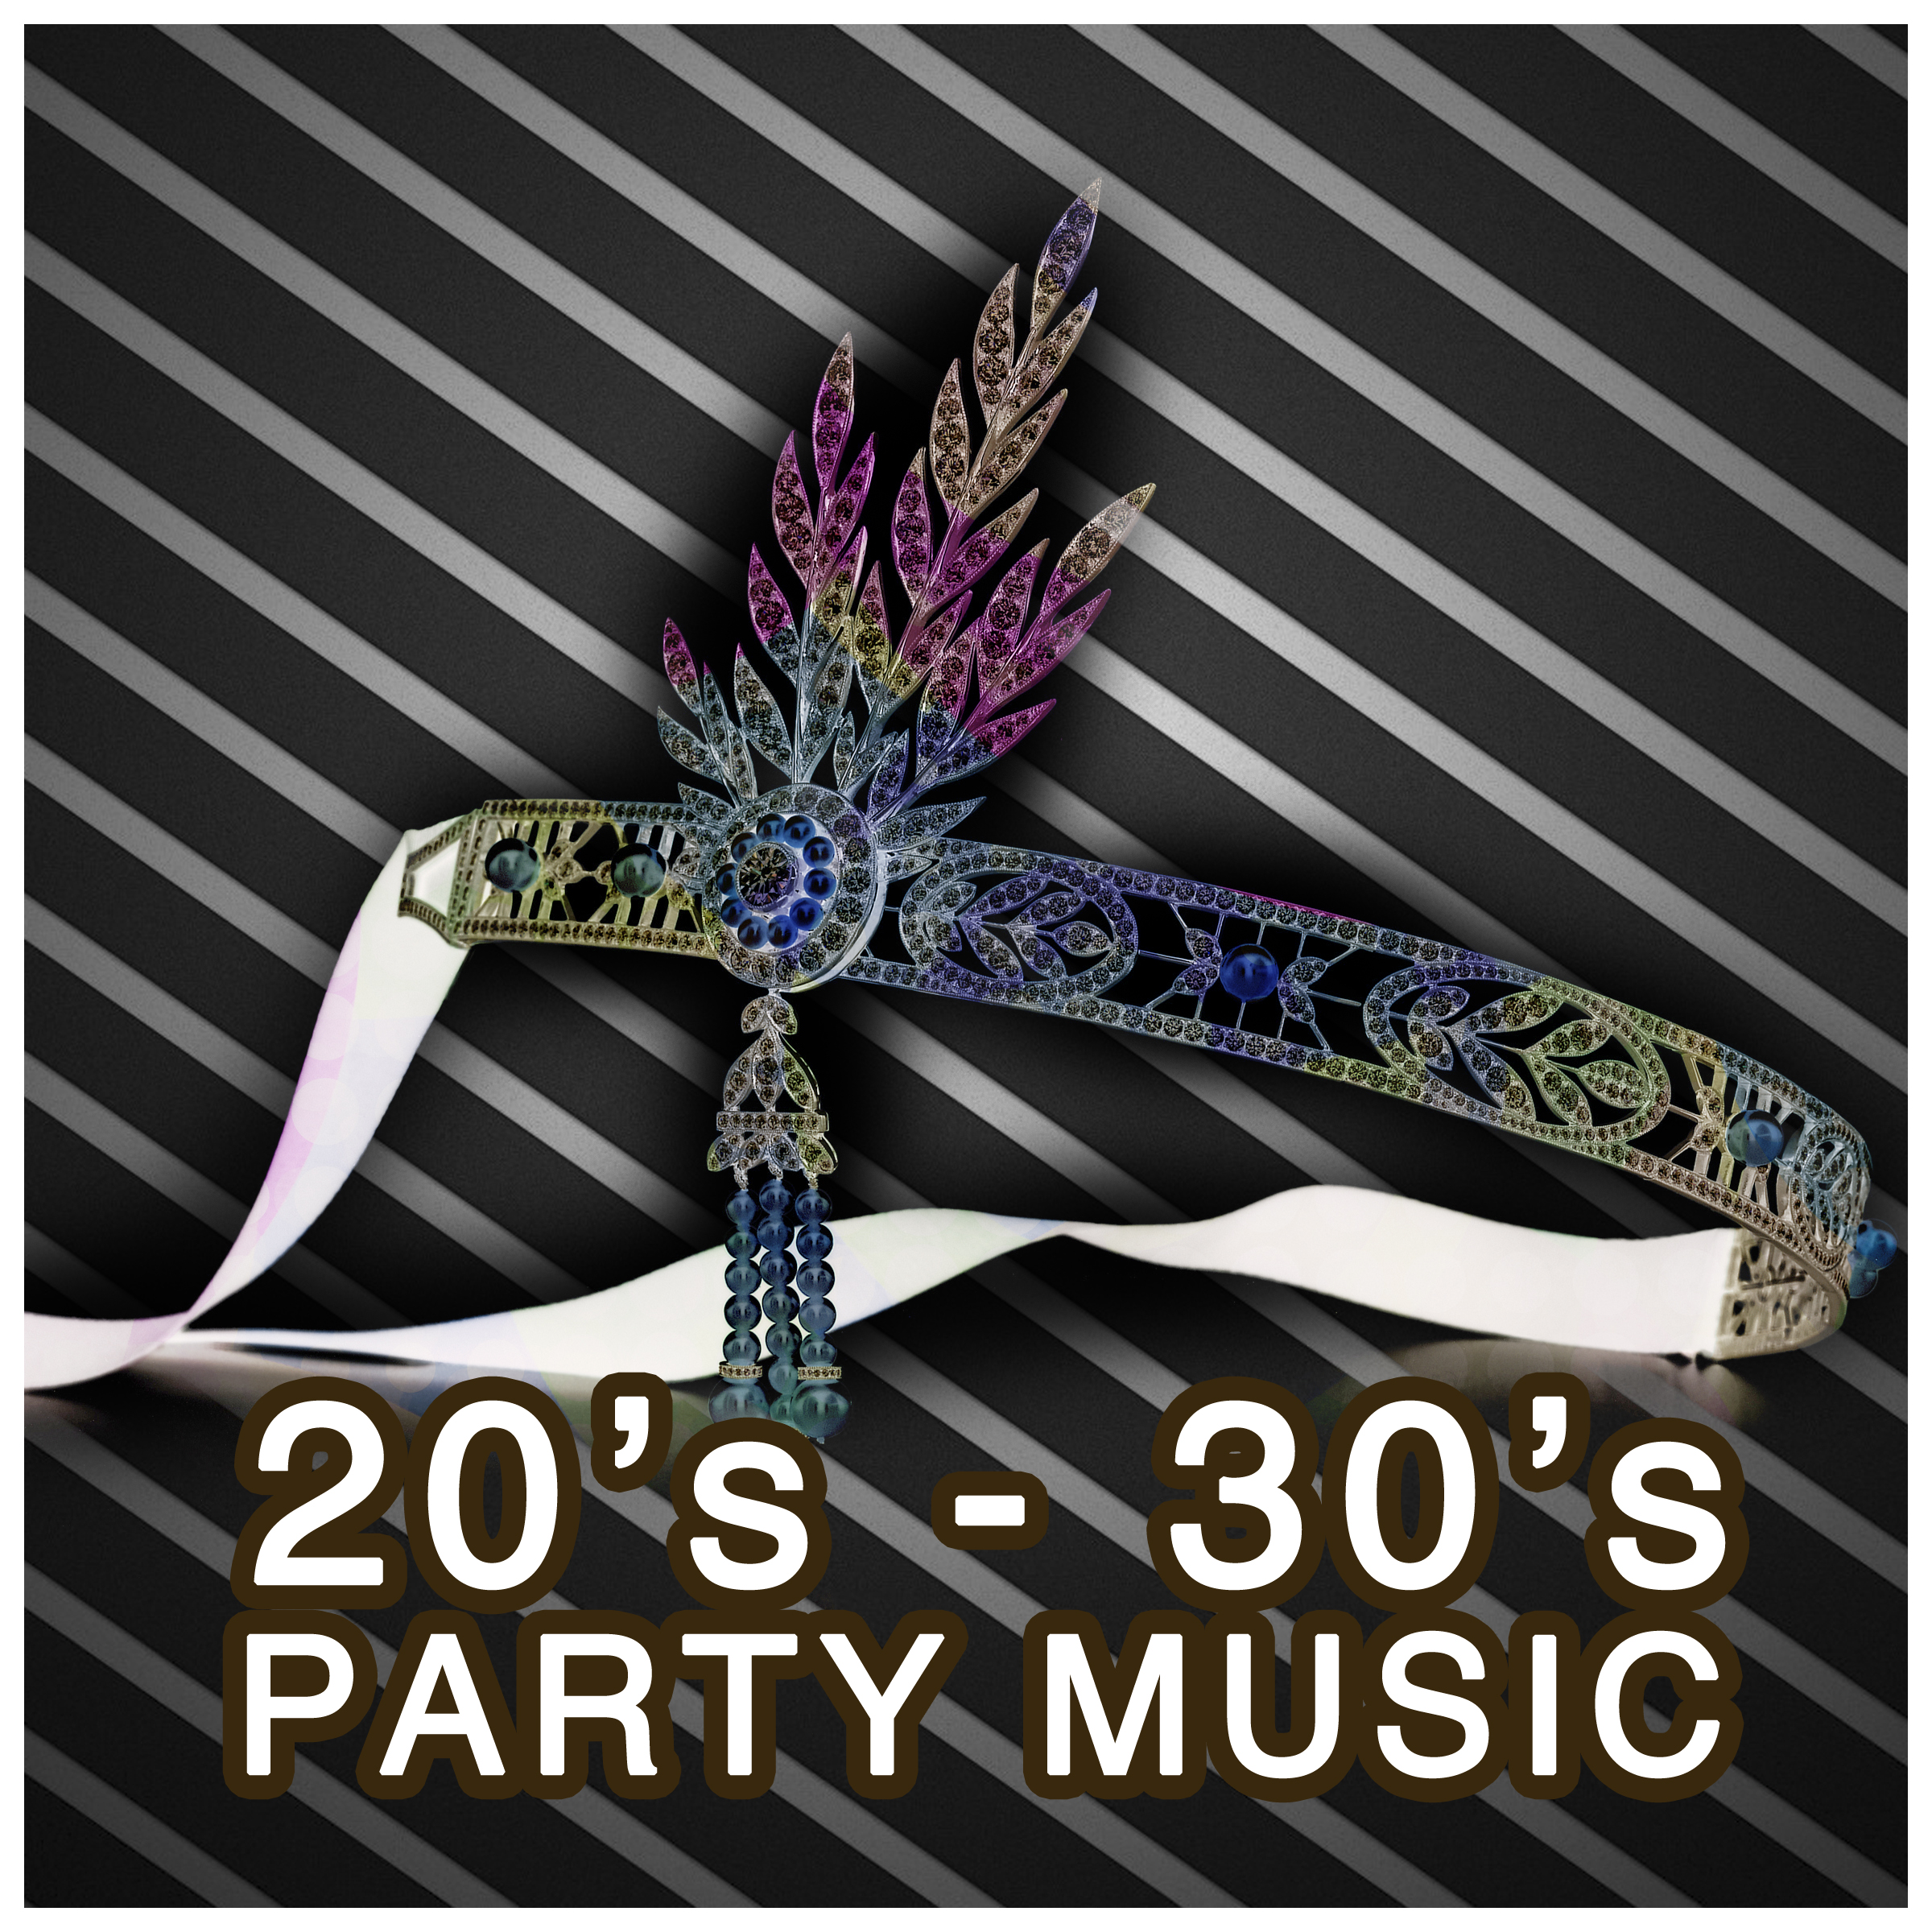 20's - 30's Party Music